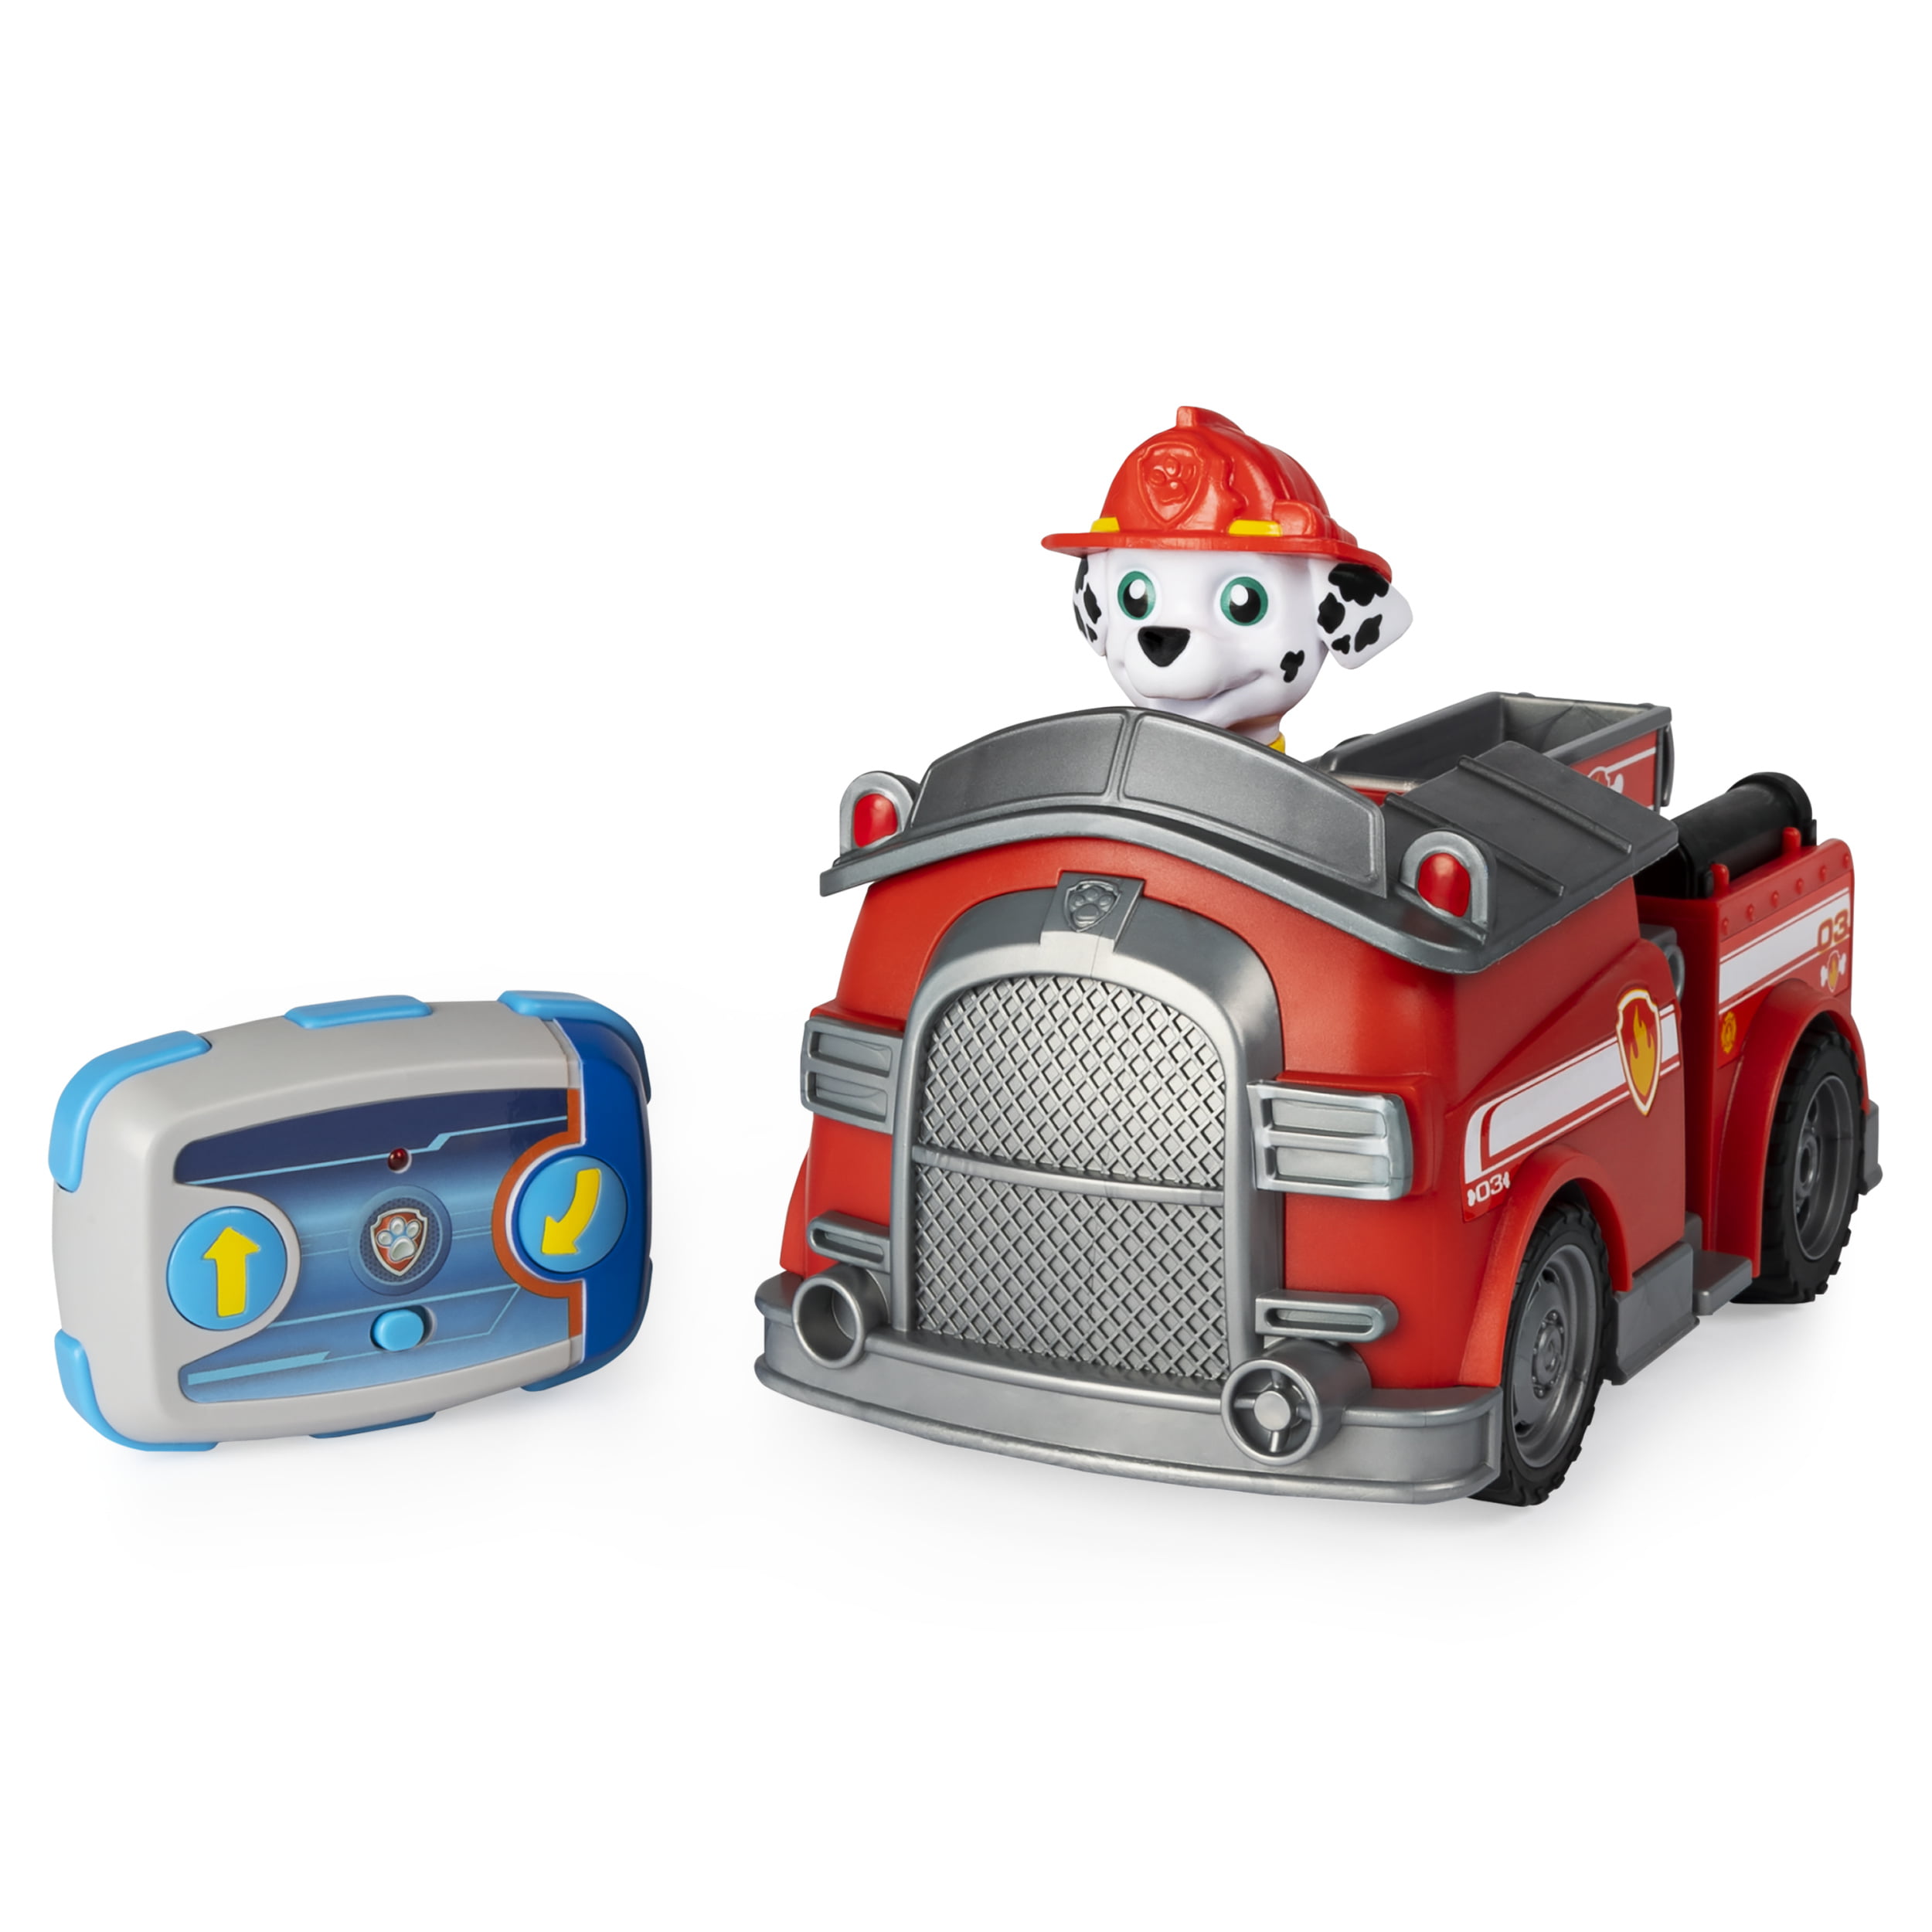 Patrol, Marshall Remote Control Truck with 2-Way Steering, for Kids Aged 3 and Up - Walmart.com